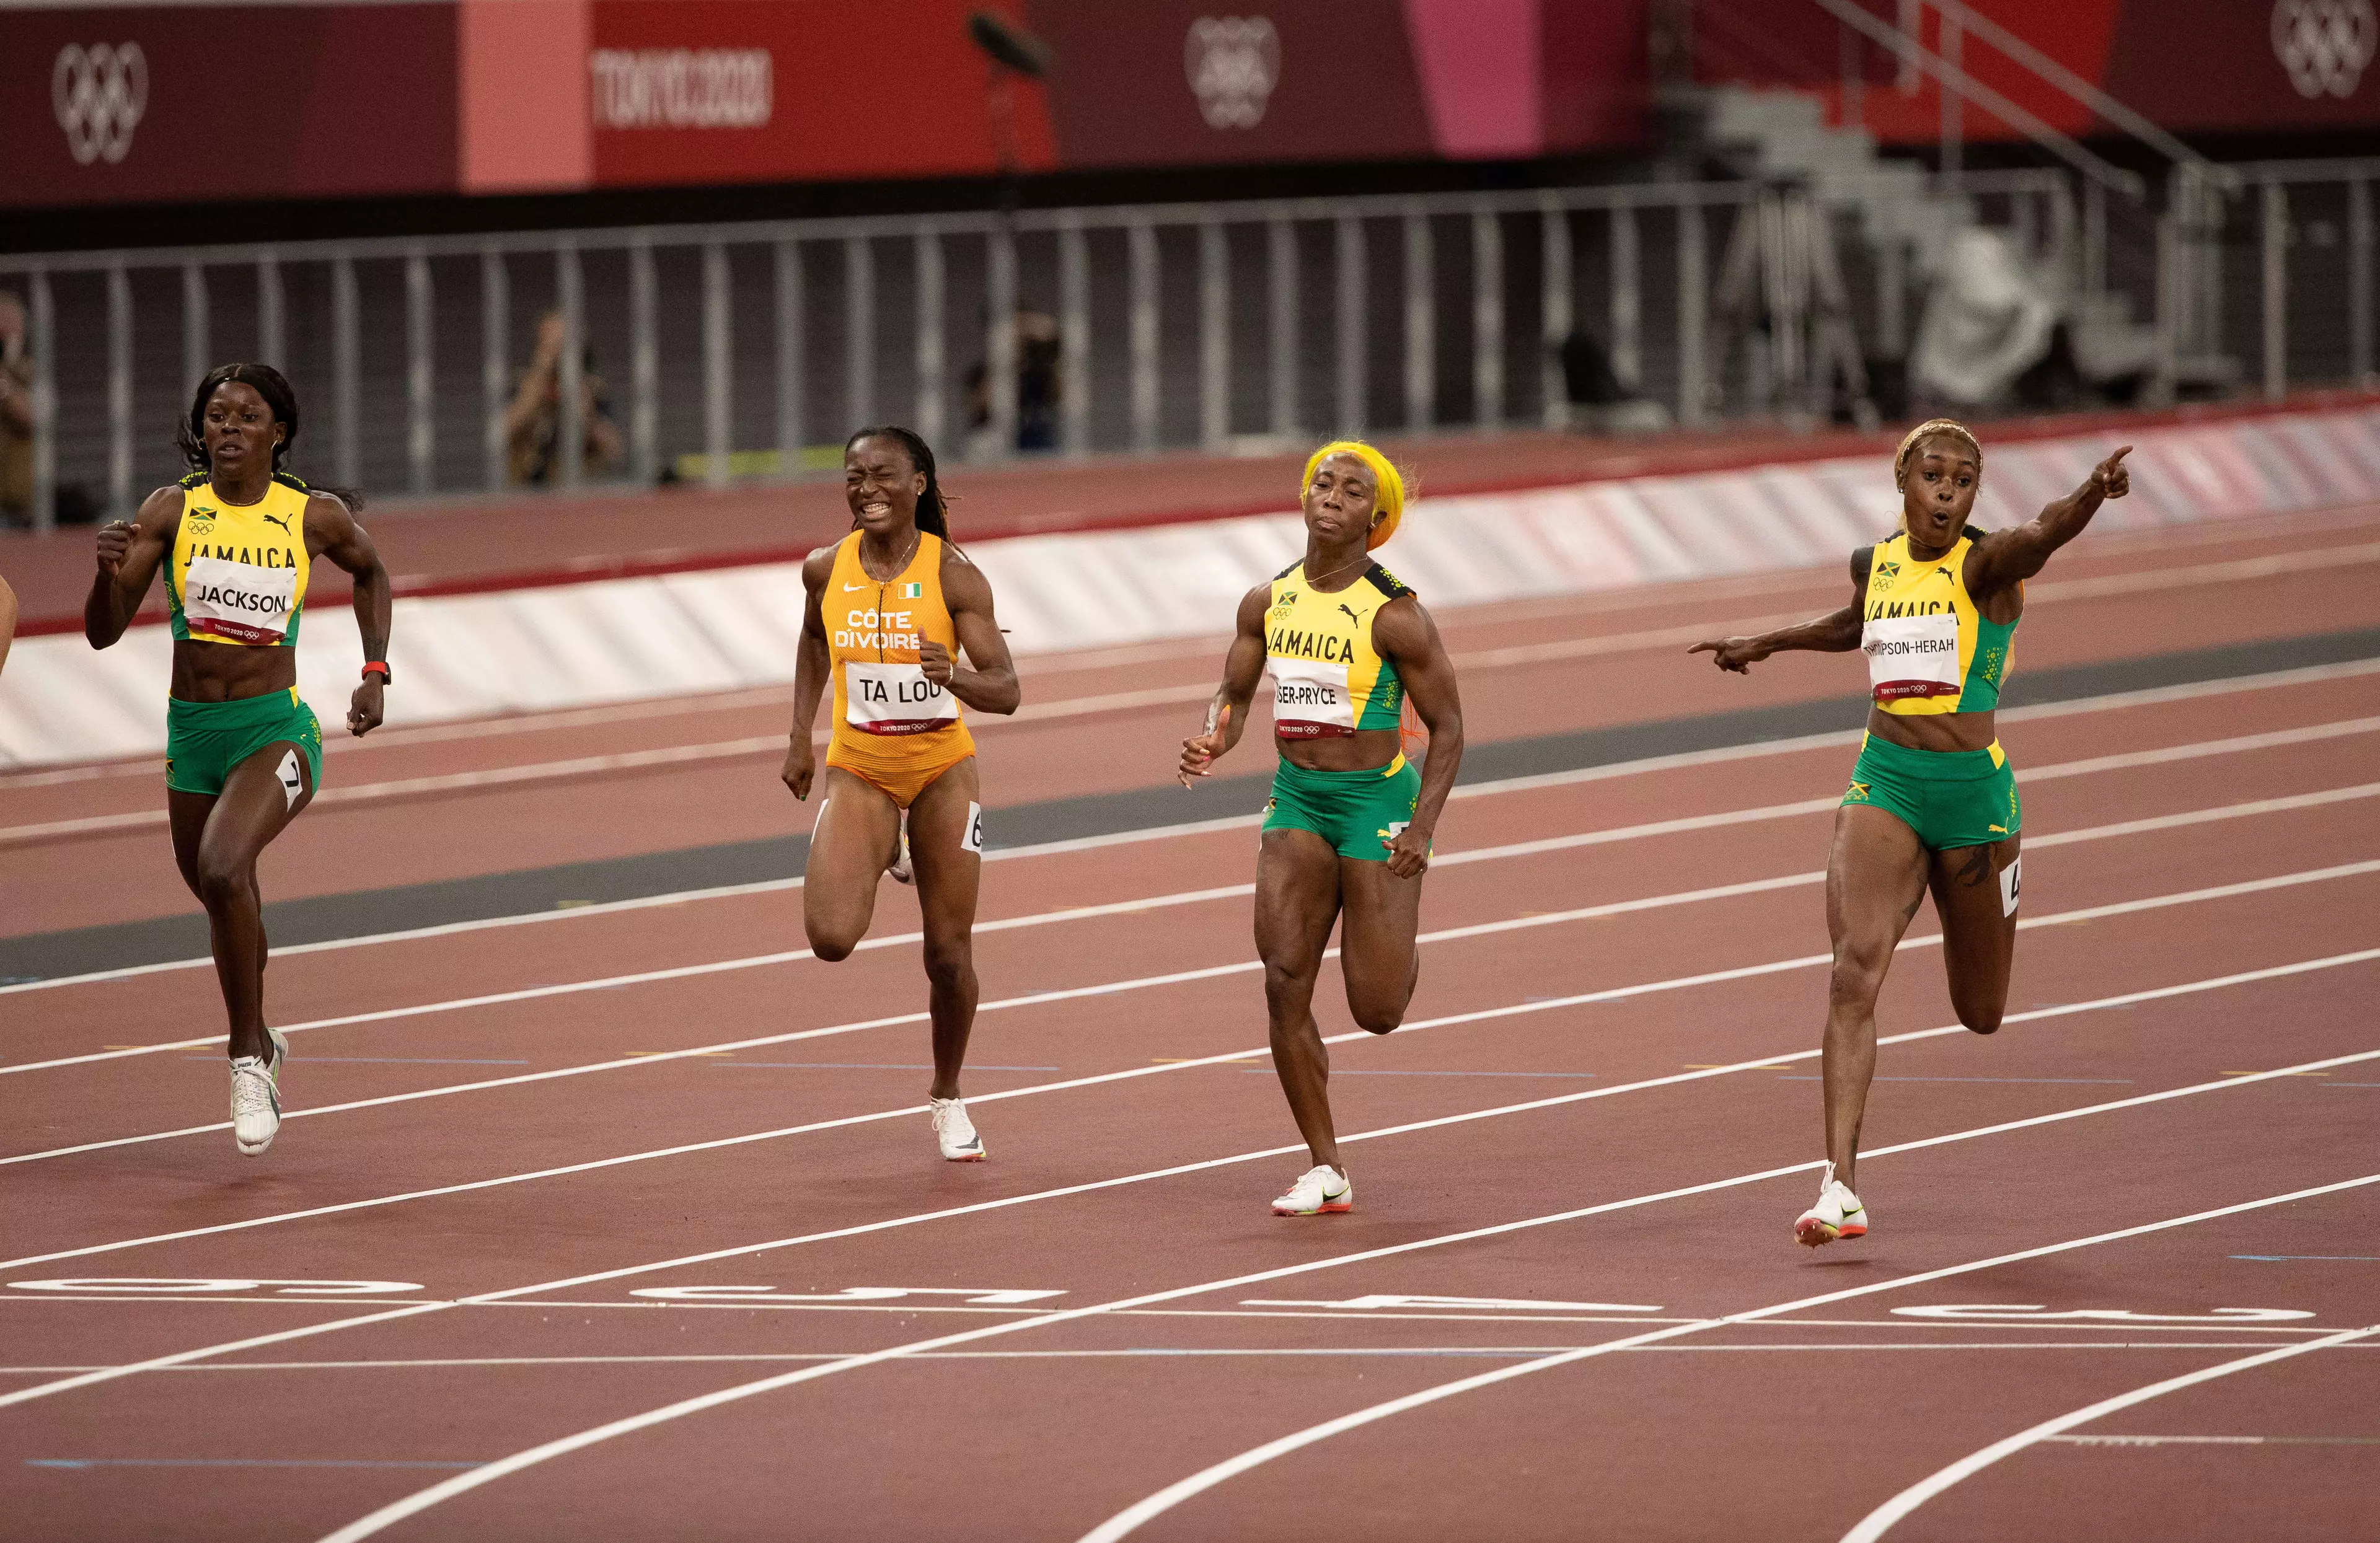 Jackson crossed the line with her fellow countrywomen to take bronze in the 100m race. Image: PA Images